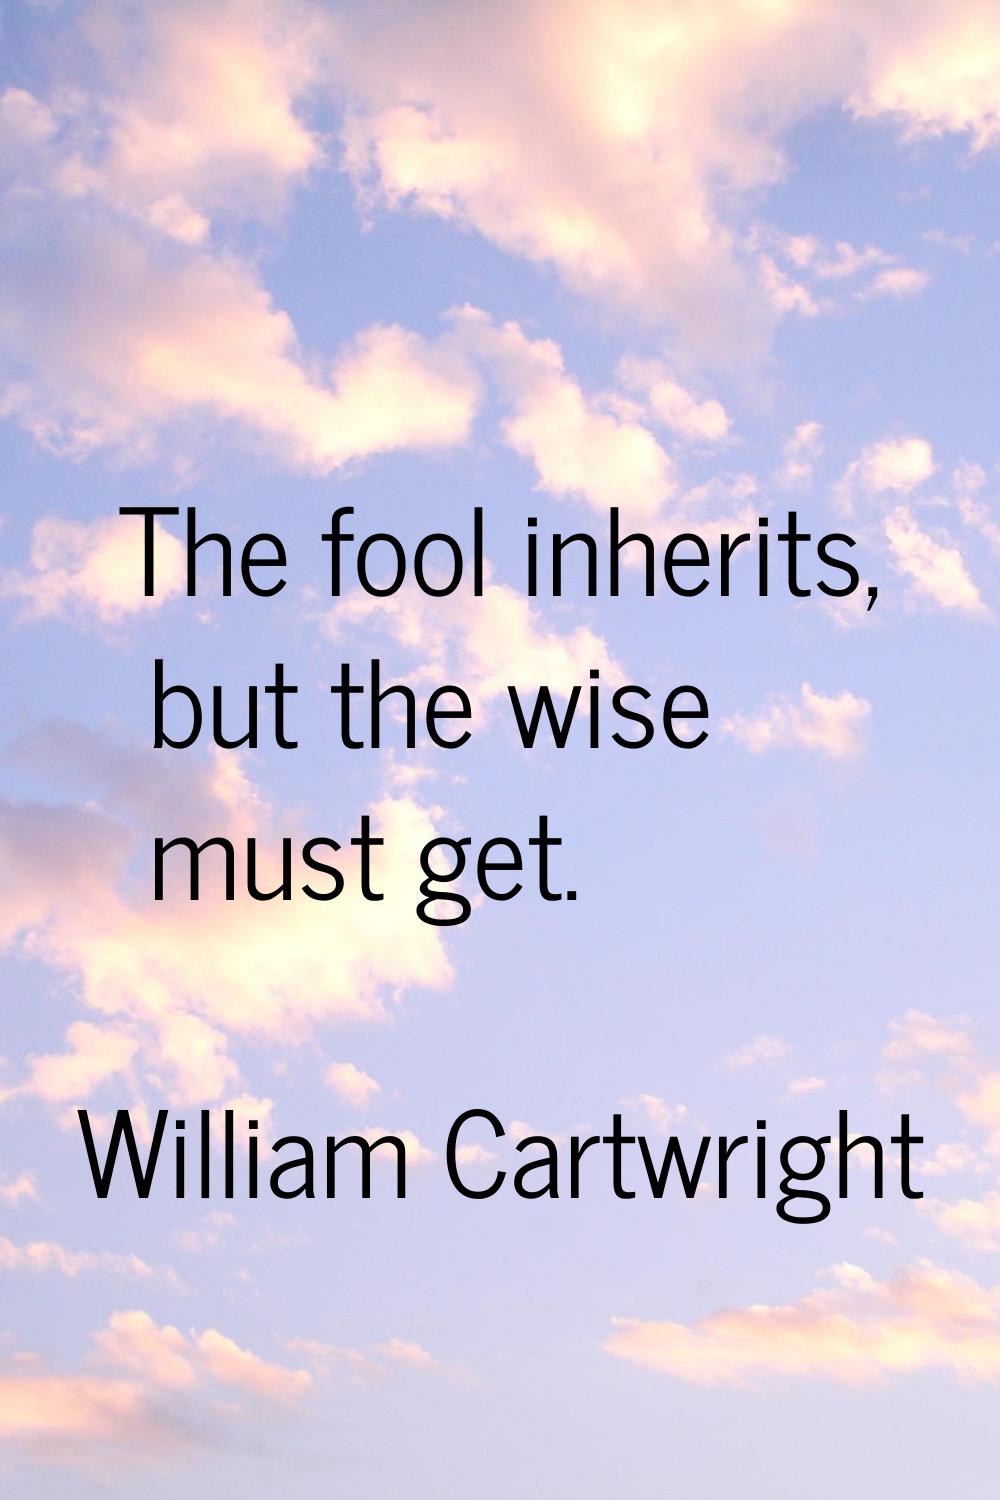 The fool inherits, but the wise must get.